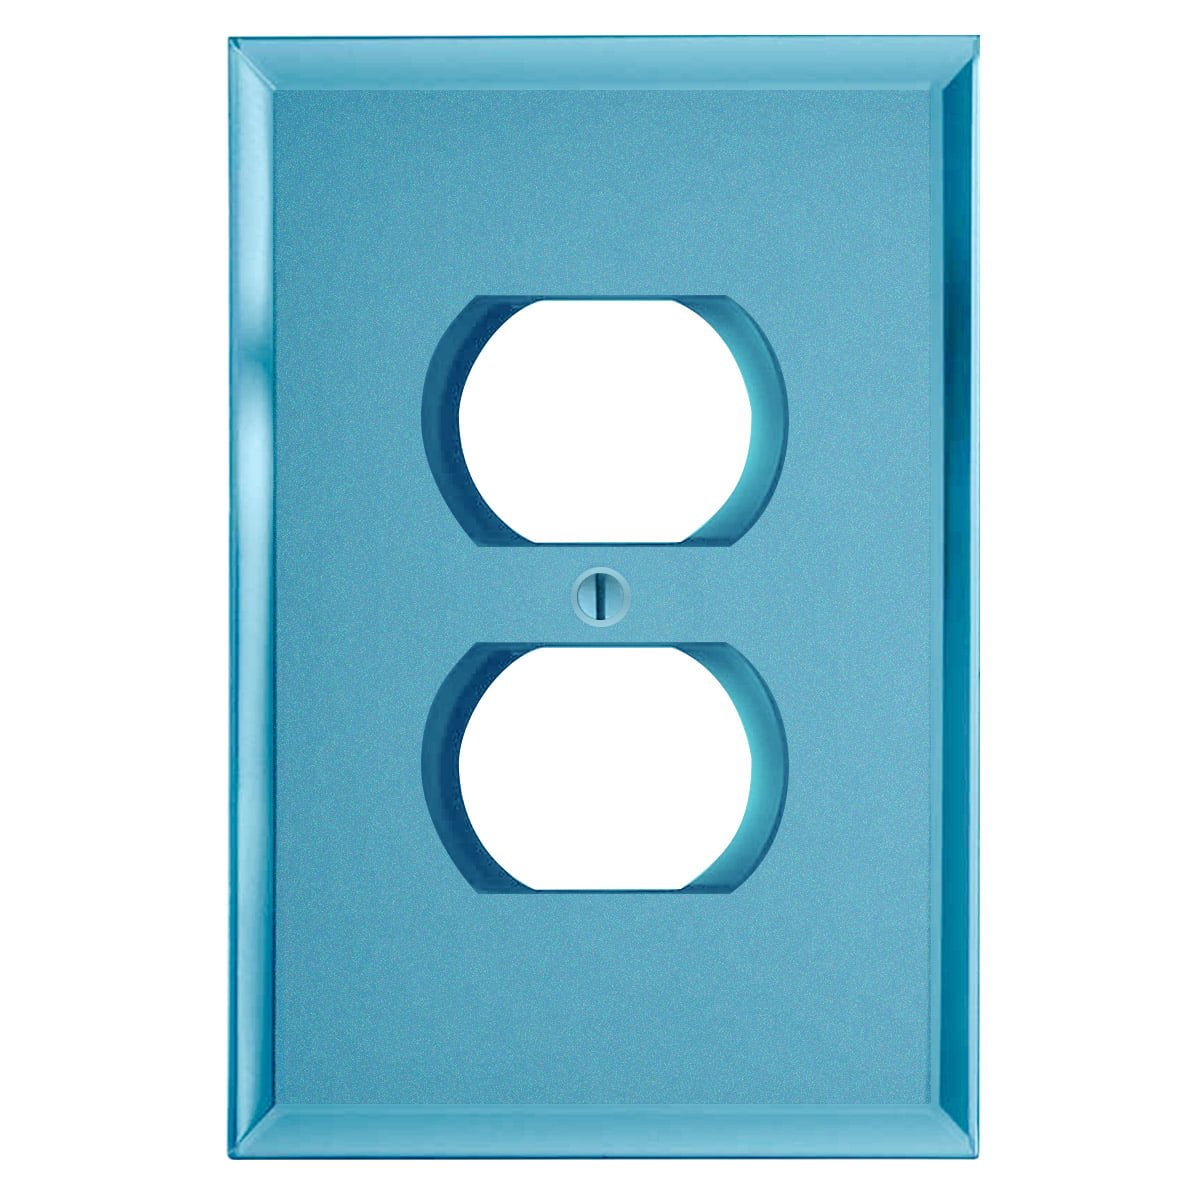 Light Panel Cover 1-Gang Device Receptacle Wallplate Single Outlet Wall Plate/Panel Plate/Cover Dolphin Light Blue Yellow Fish 